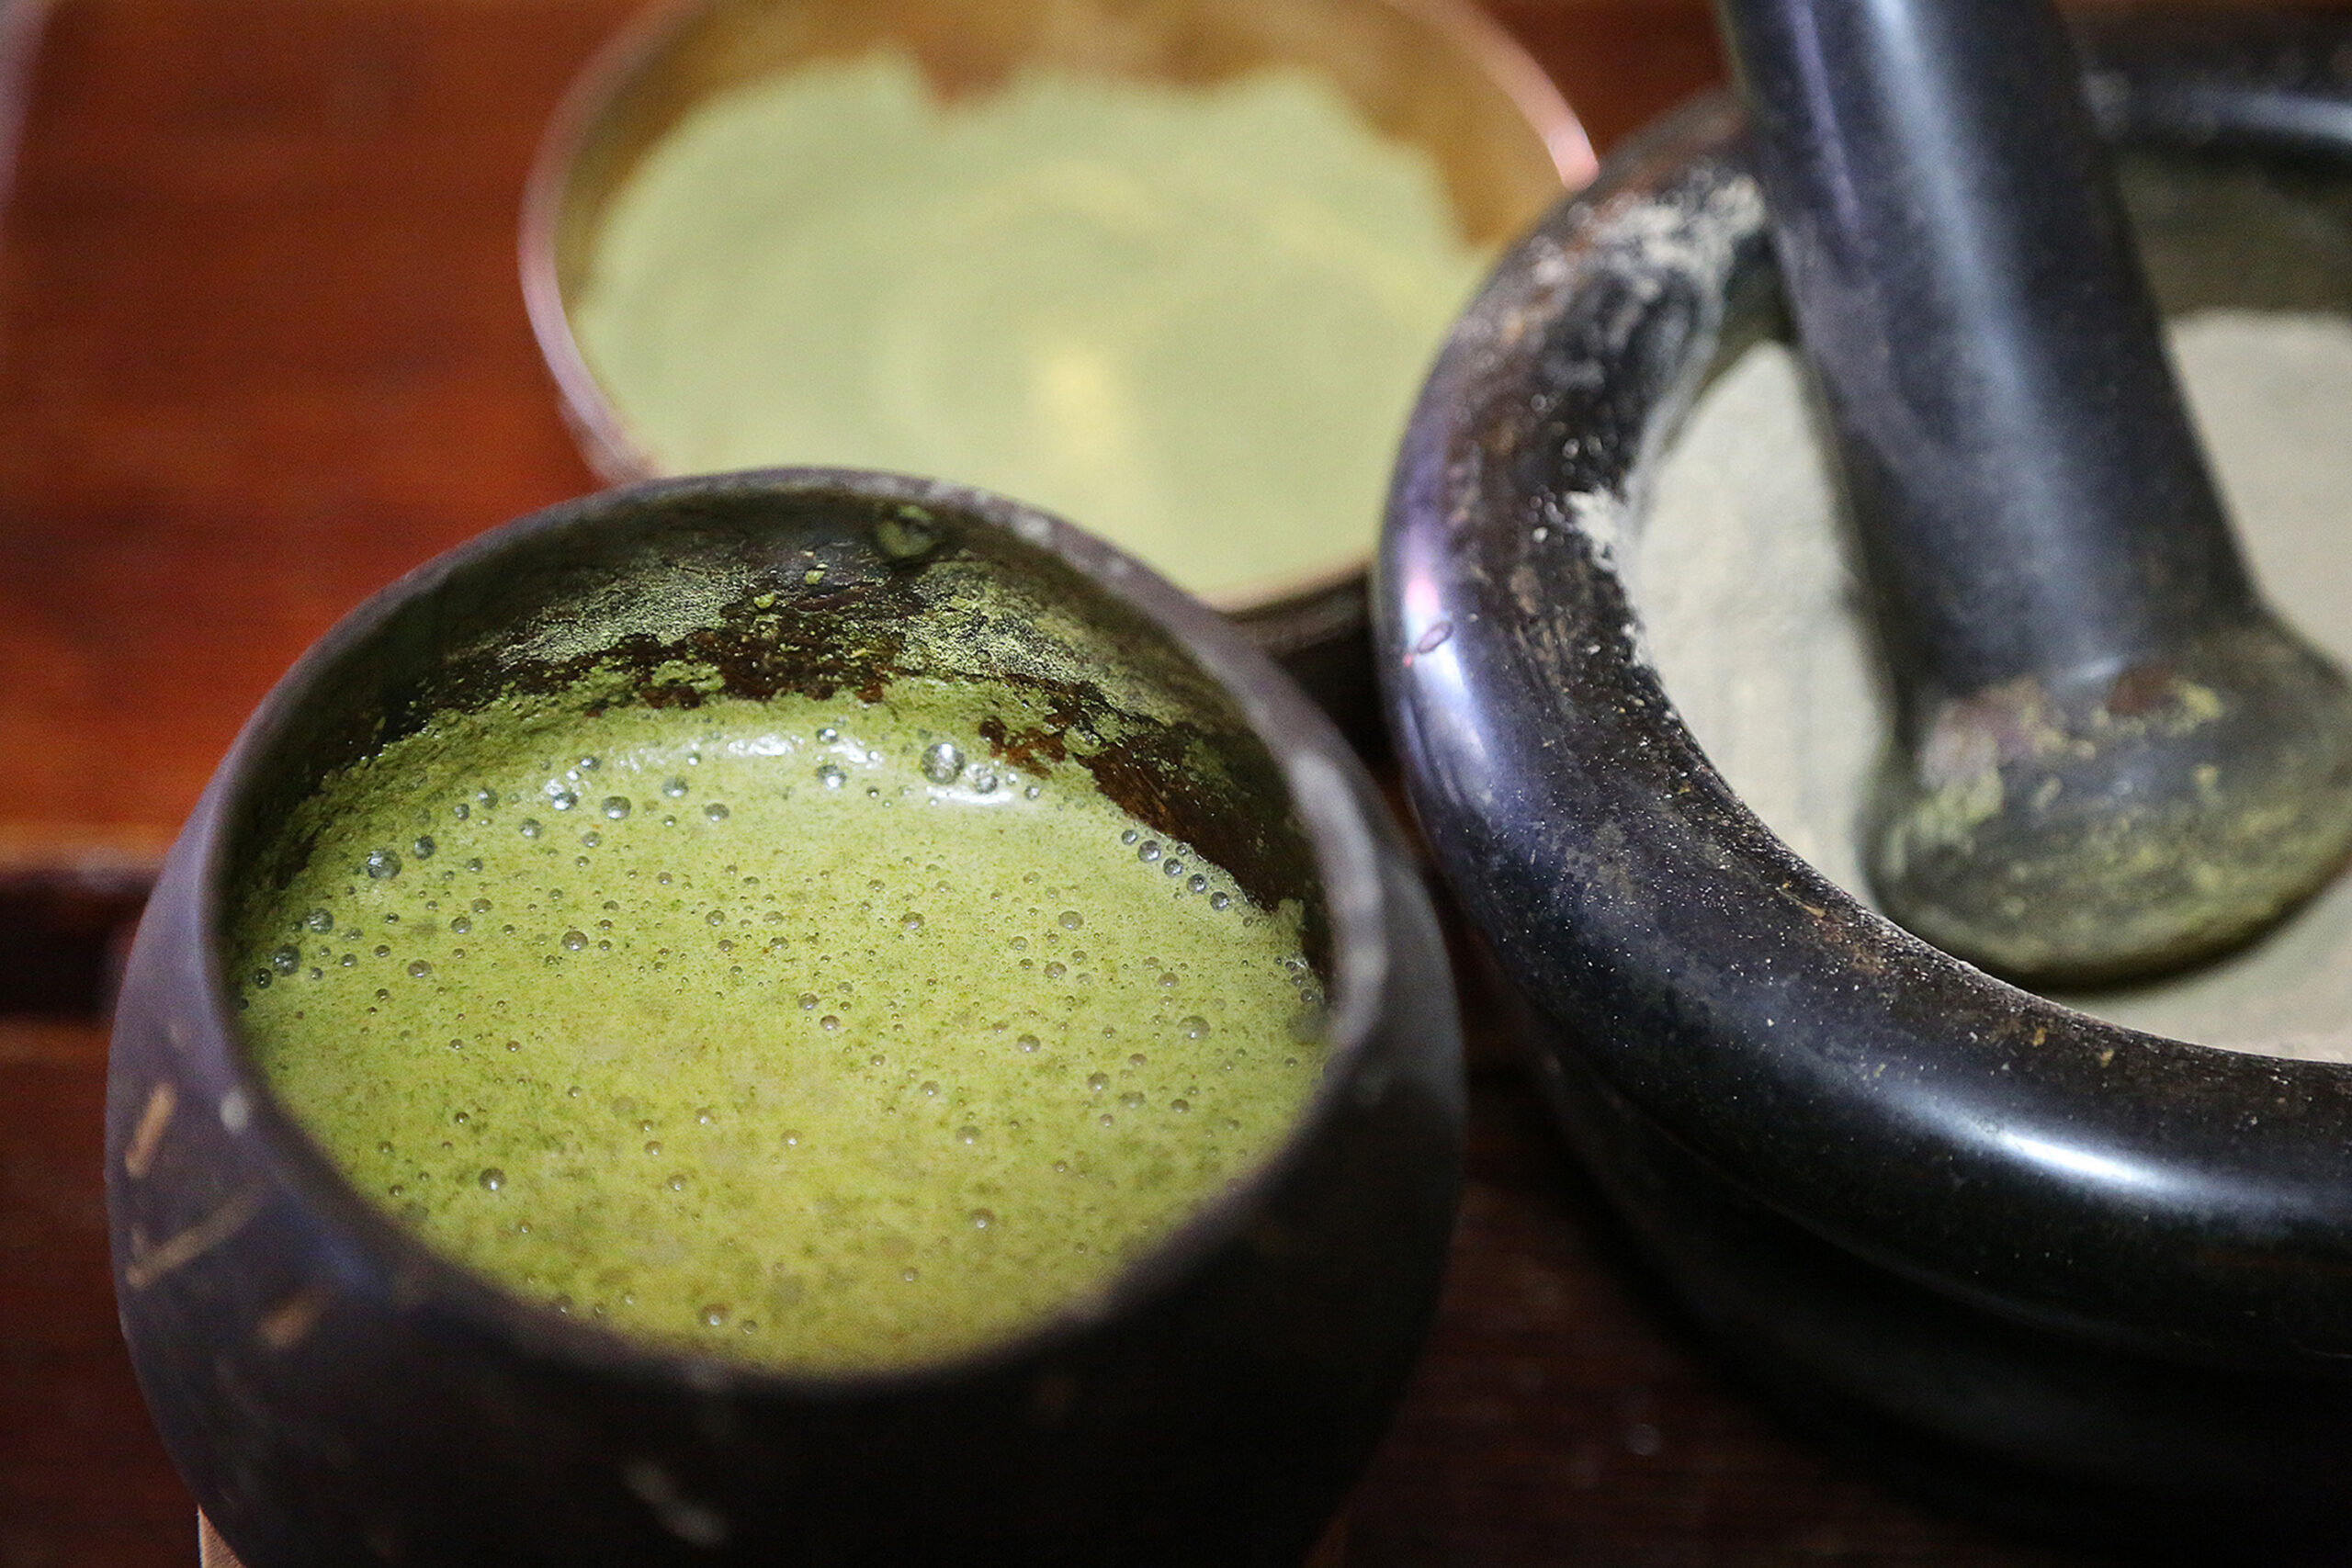 A black mortar and pestle with green thick liquid inside the mortar.